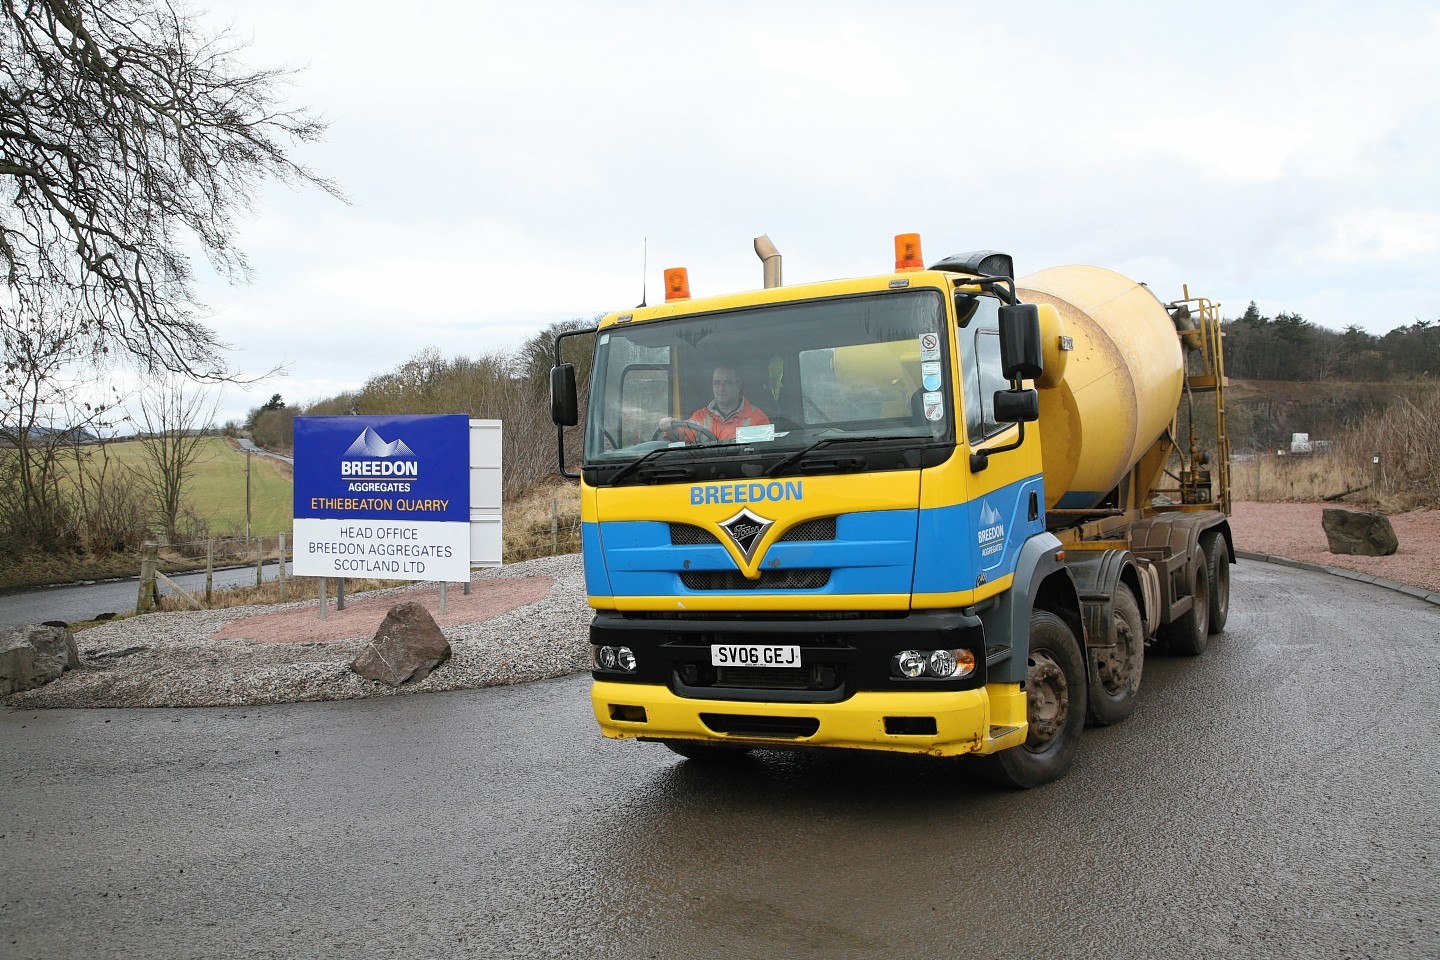 Breedon Aggregates has won a contract to supply materials for the A9 dualling.